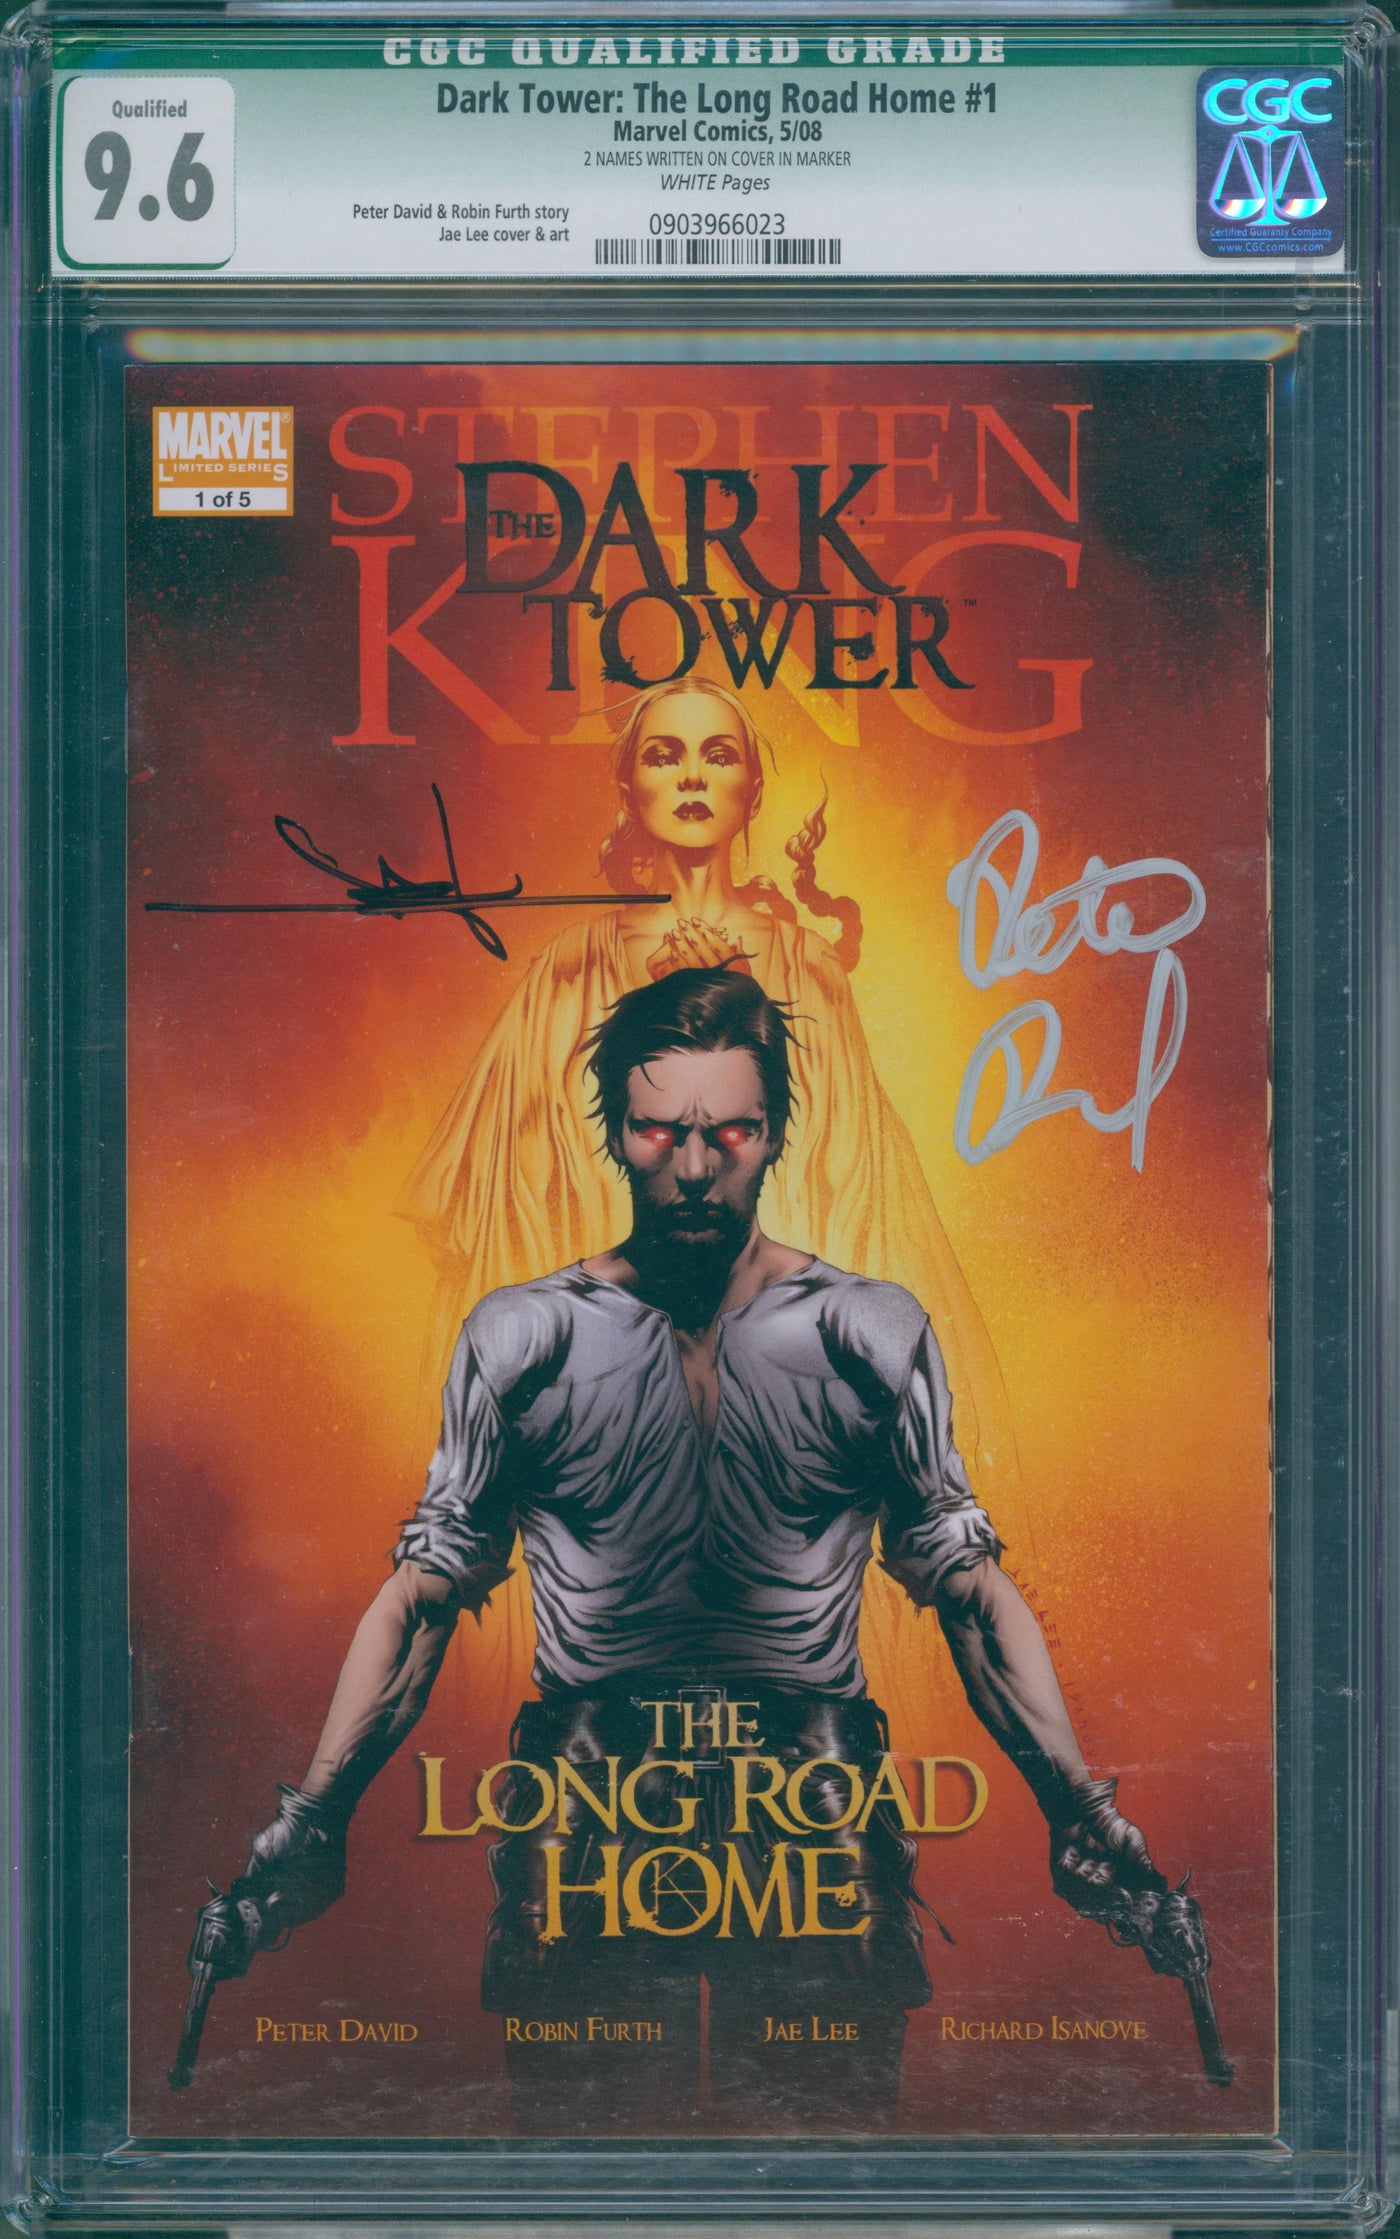 Dark tower: the long road home #1 CGC 9.6